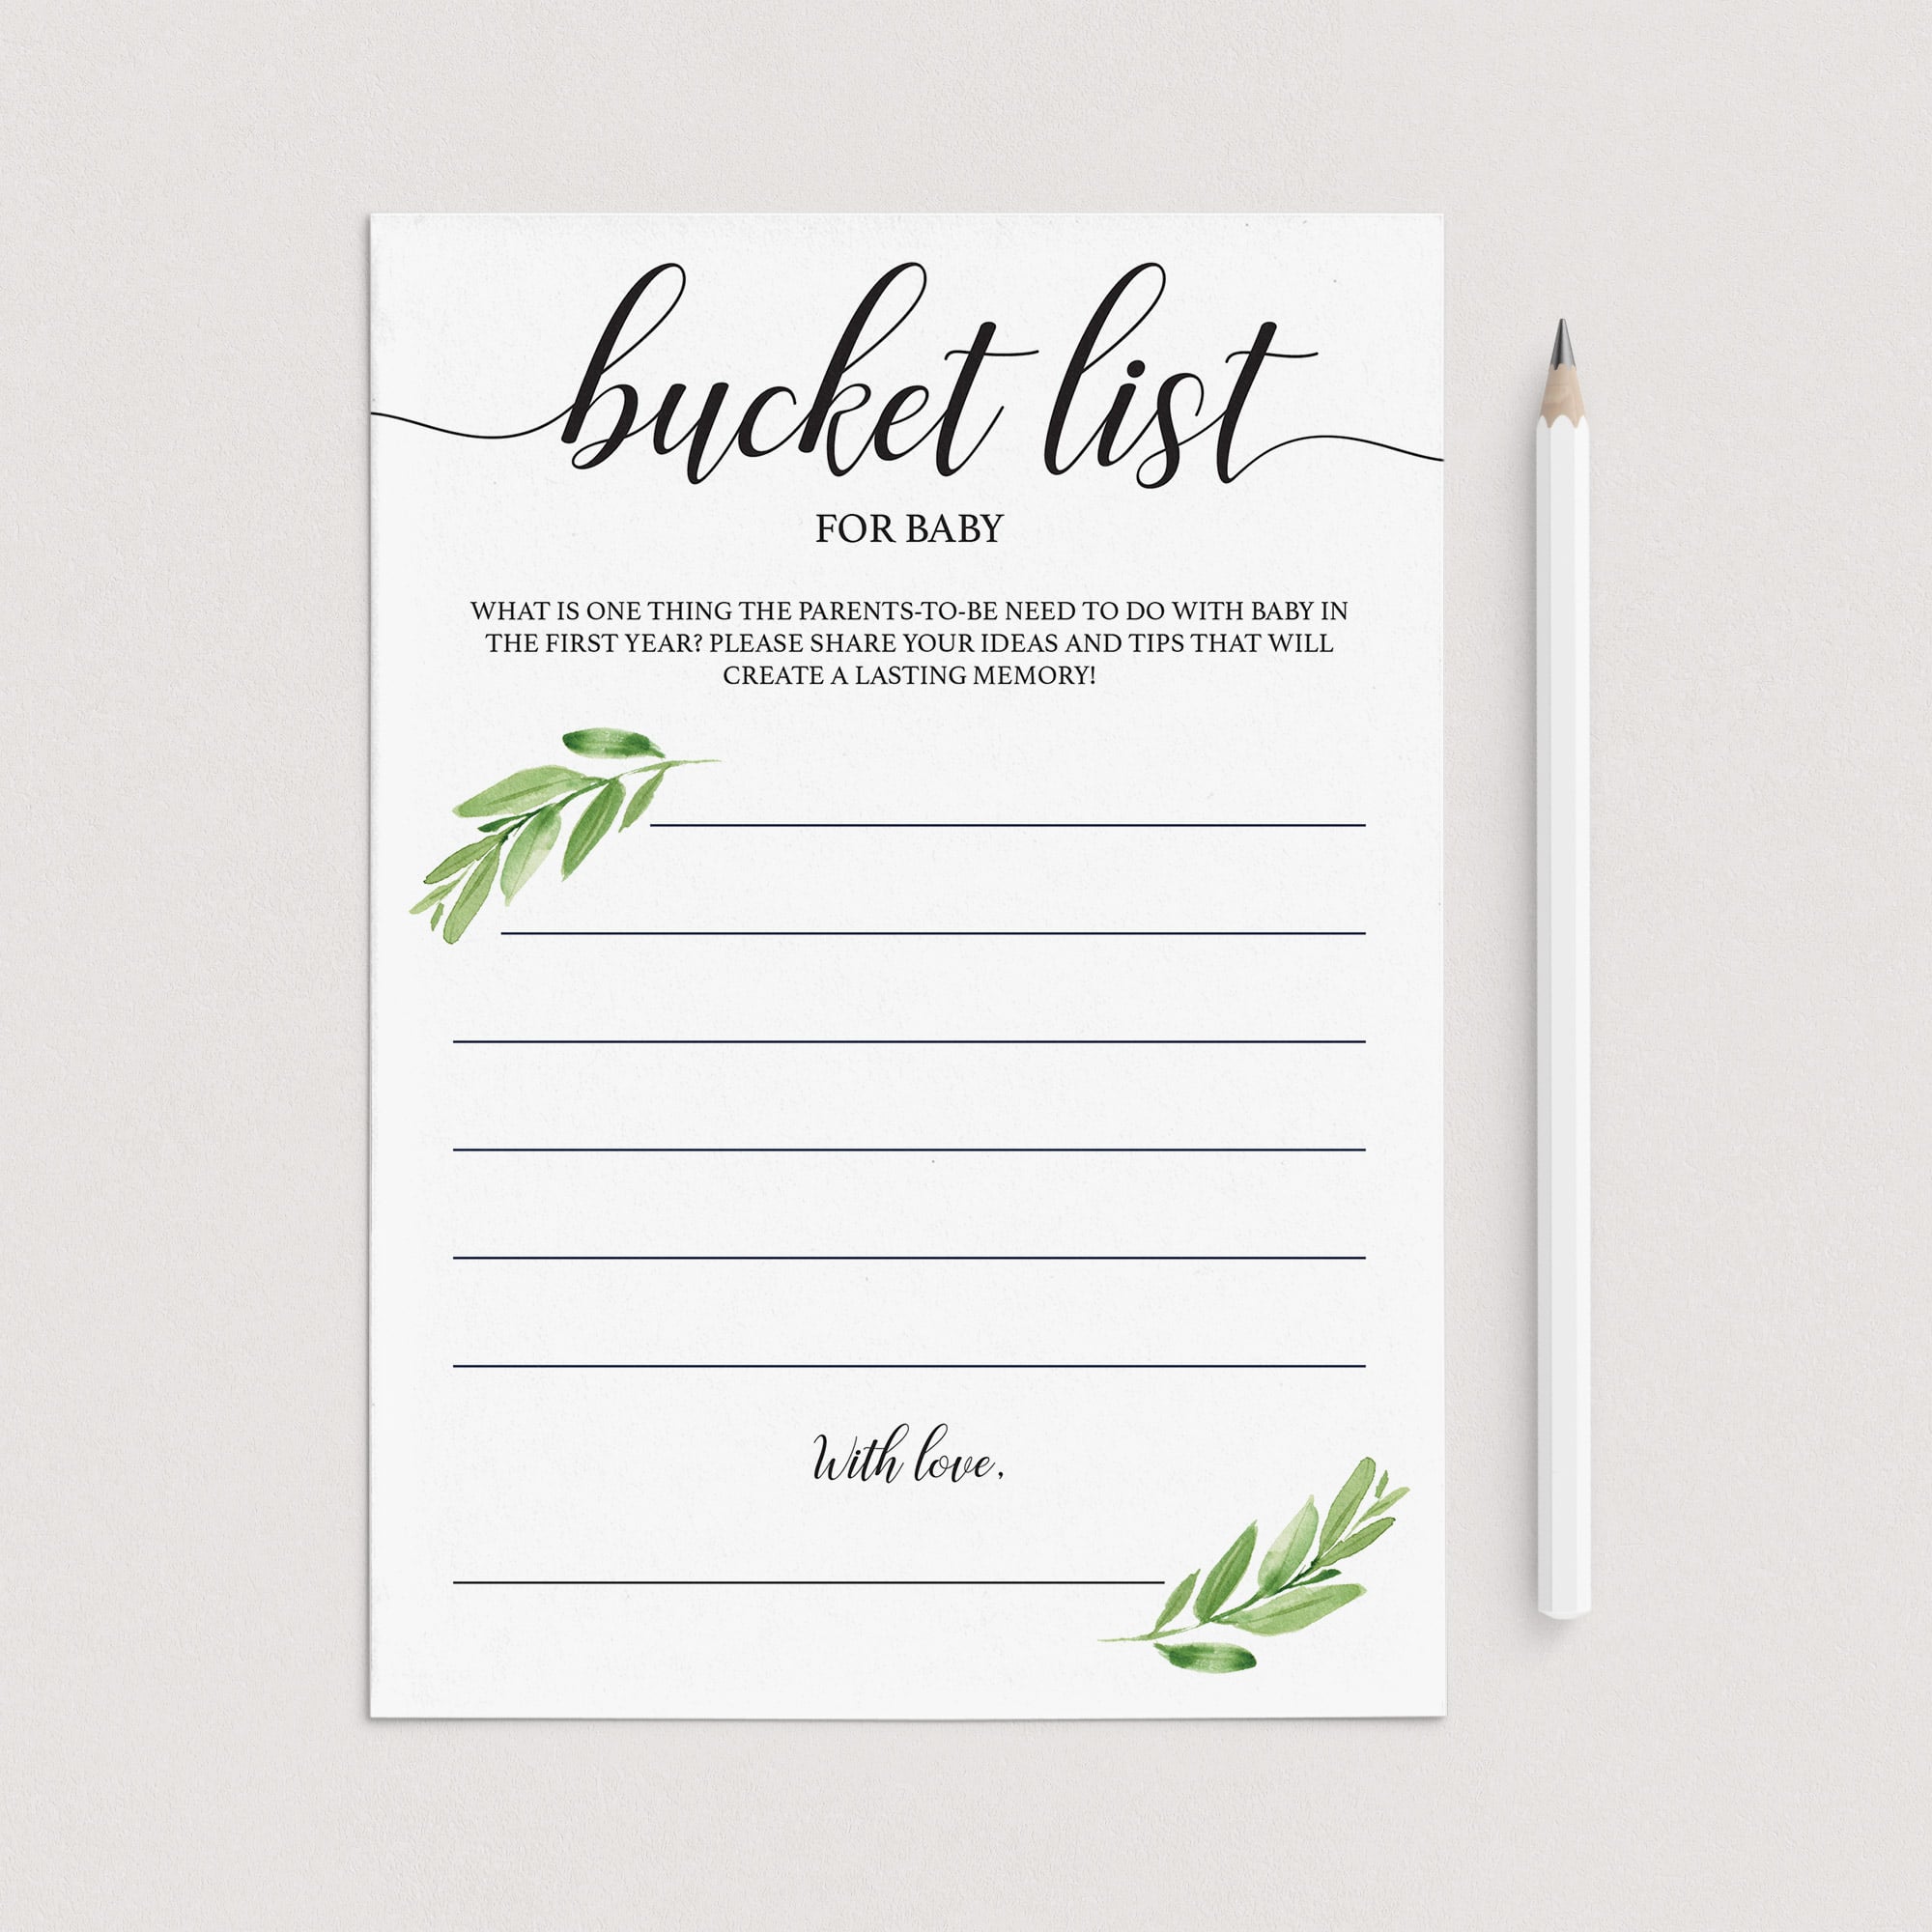 Printable baby bucket list cards for new parents by LittleSizzle